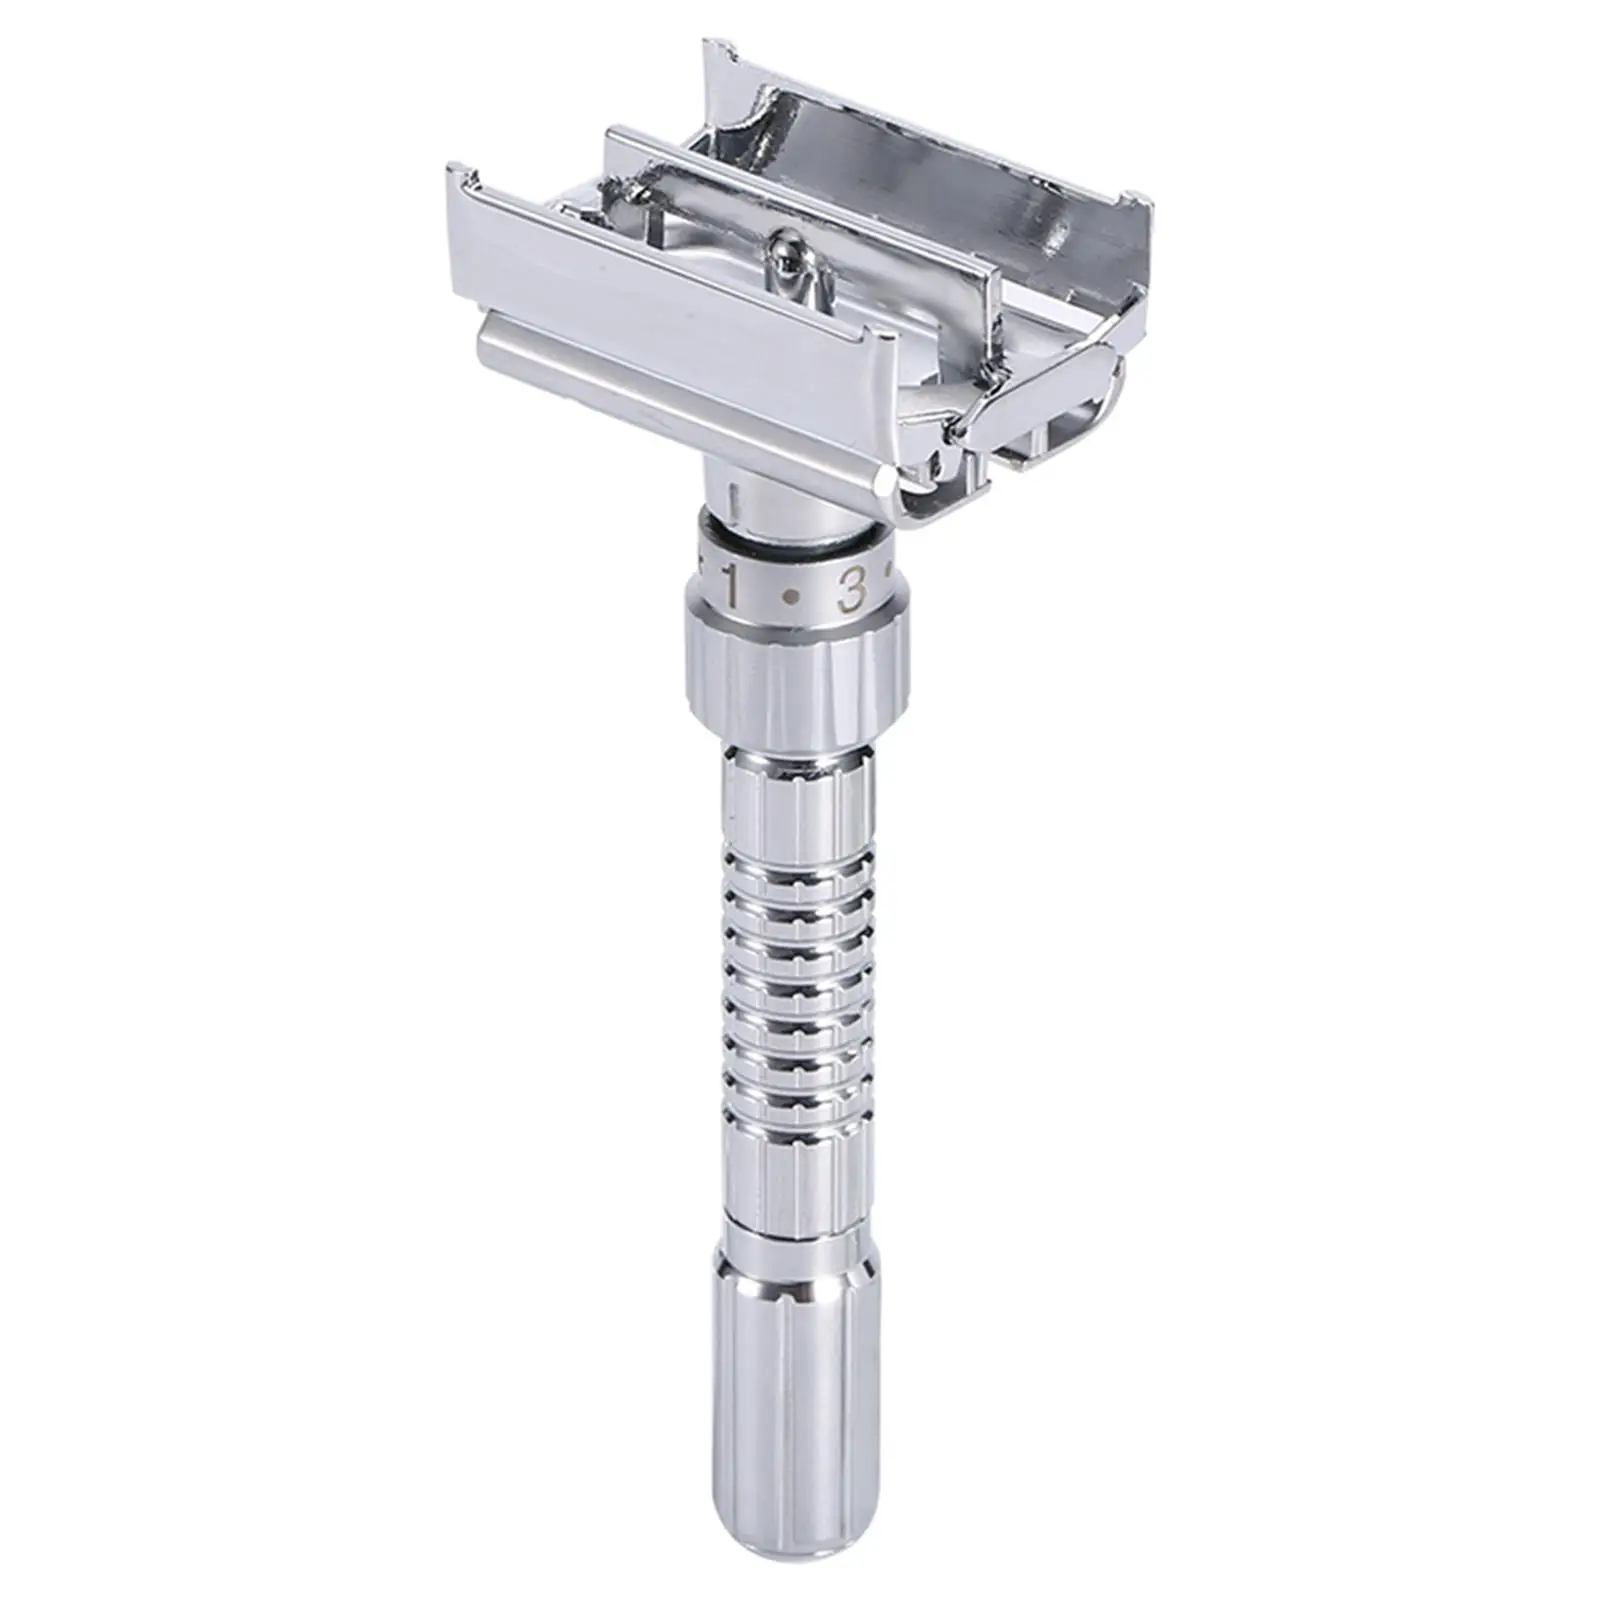 Manual Double Edge Safety Razor with 5 Blades Reusable Plated Eco Friendly Zinc Alloy Adjustable Beard Shaver for Everyday Use